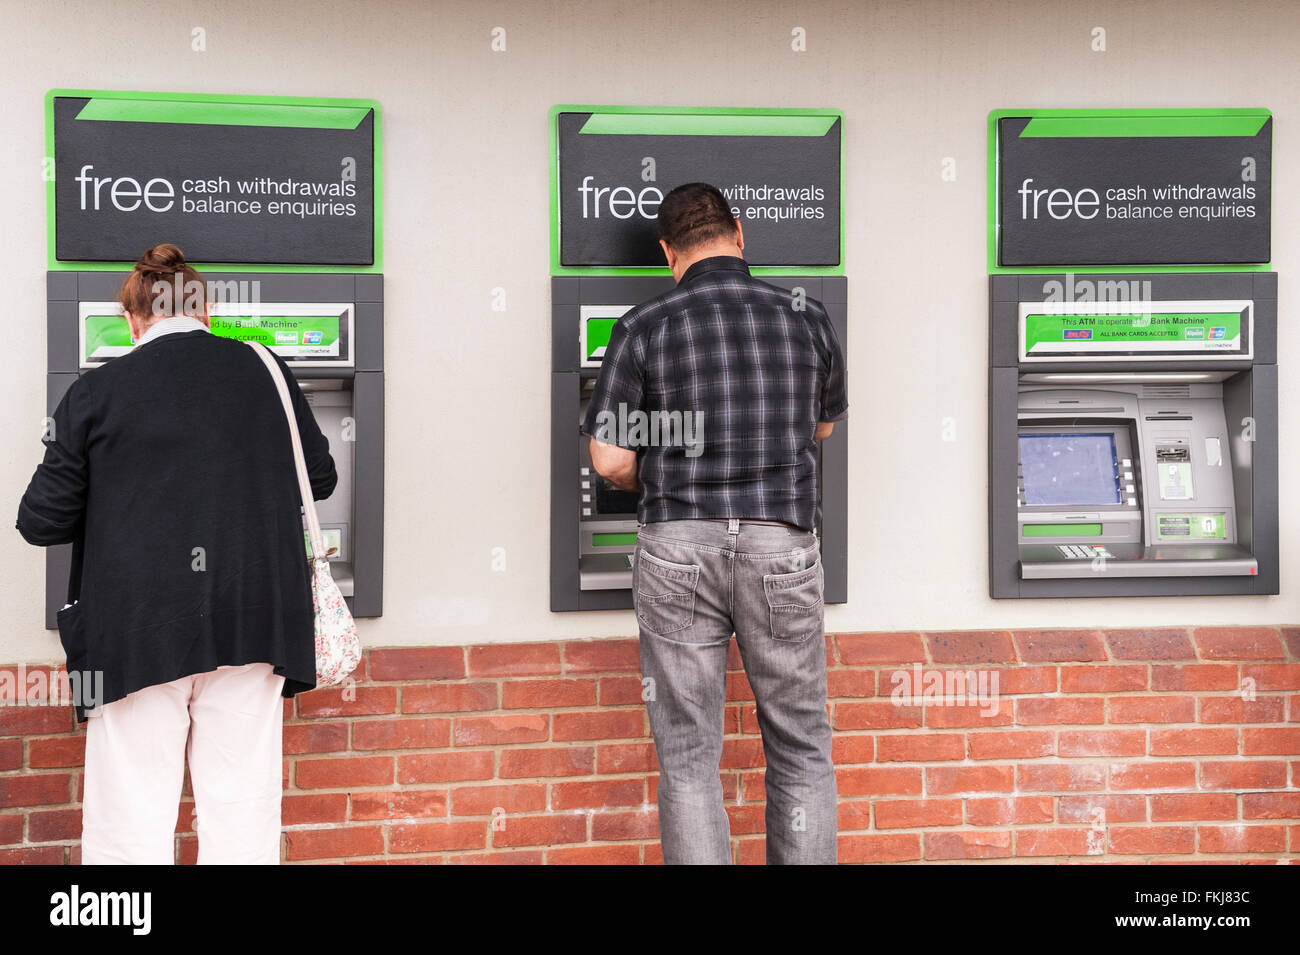 People using ATM cash machines in the Uk Stock Photo